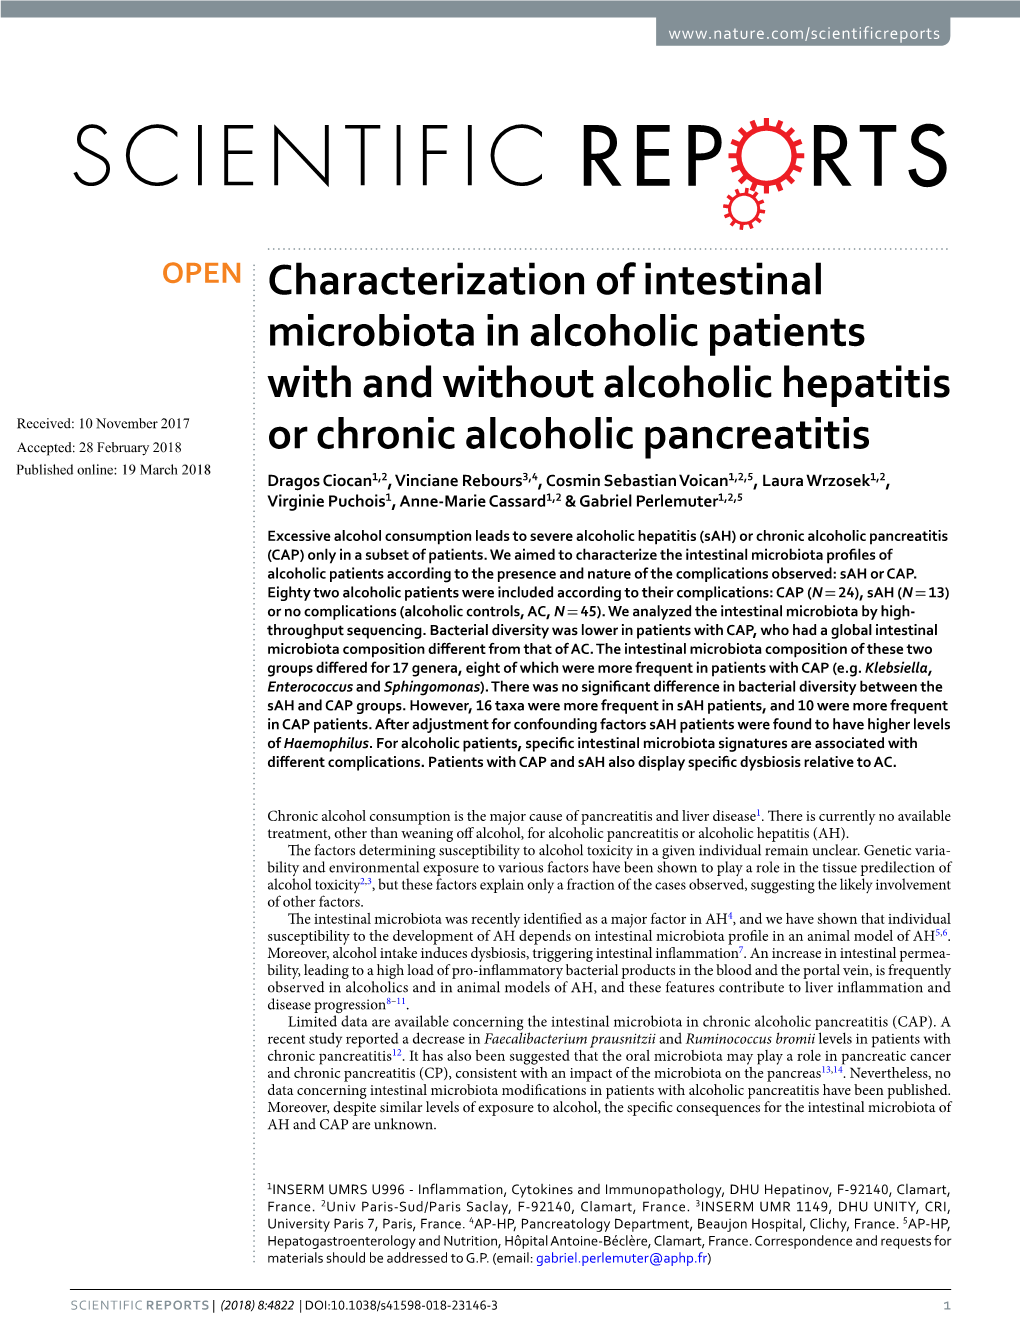 Characterization of Intestinal Microbiota in Alcoholic Patients with and Without Alcoholic Hepatitis Or Chronic Alcoholic Pancre